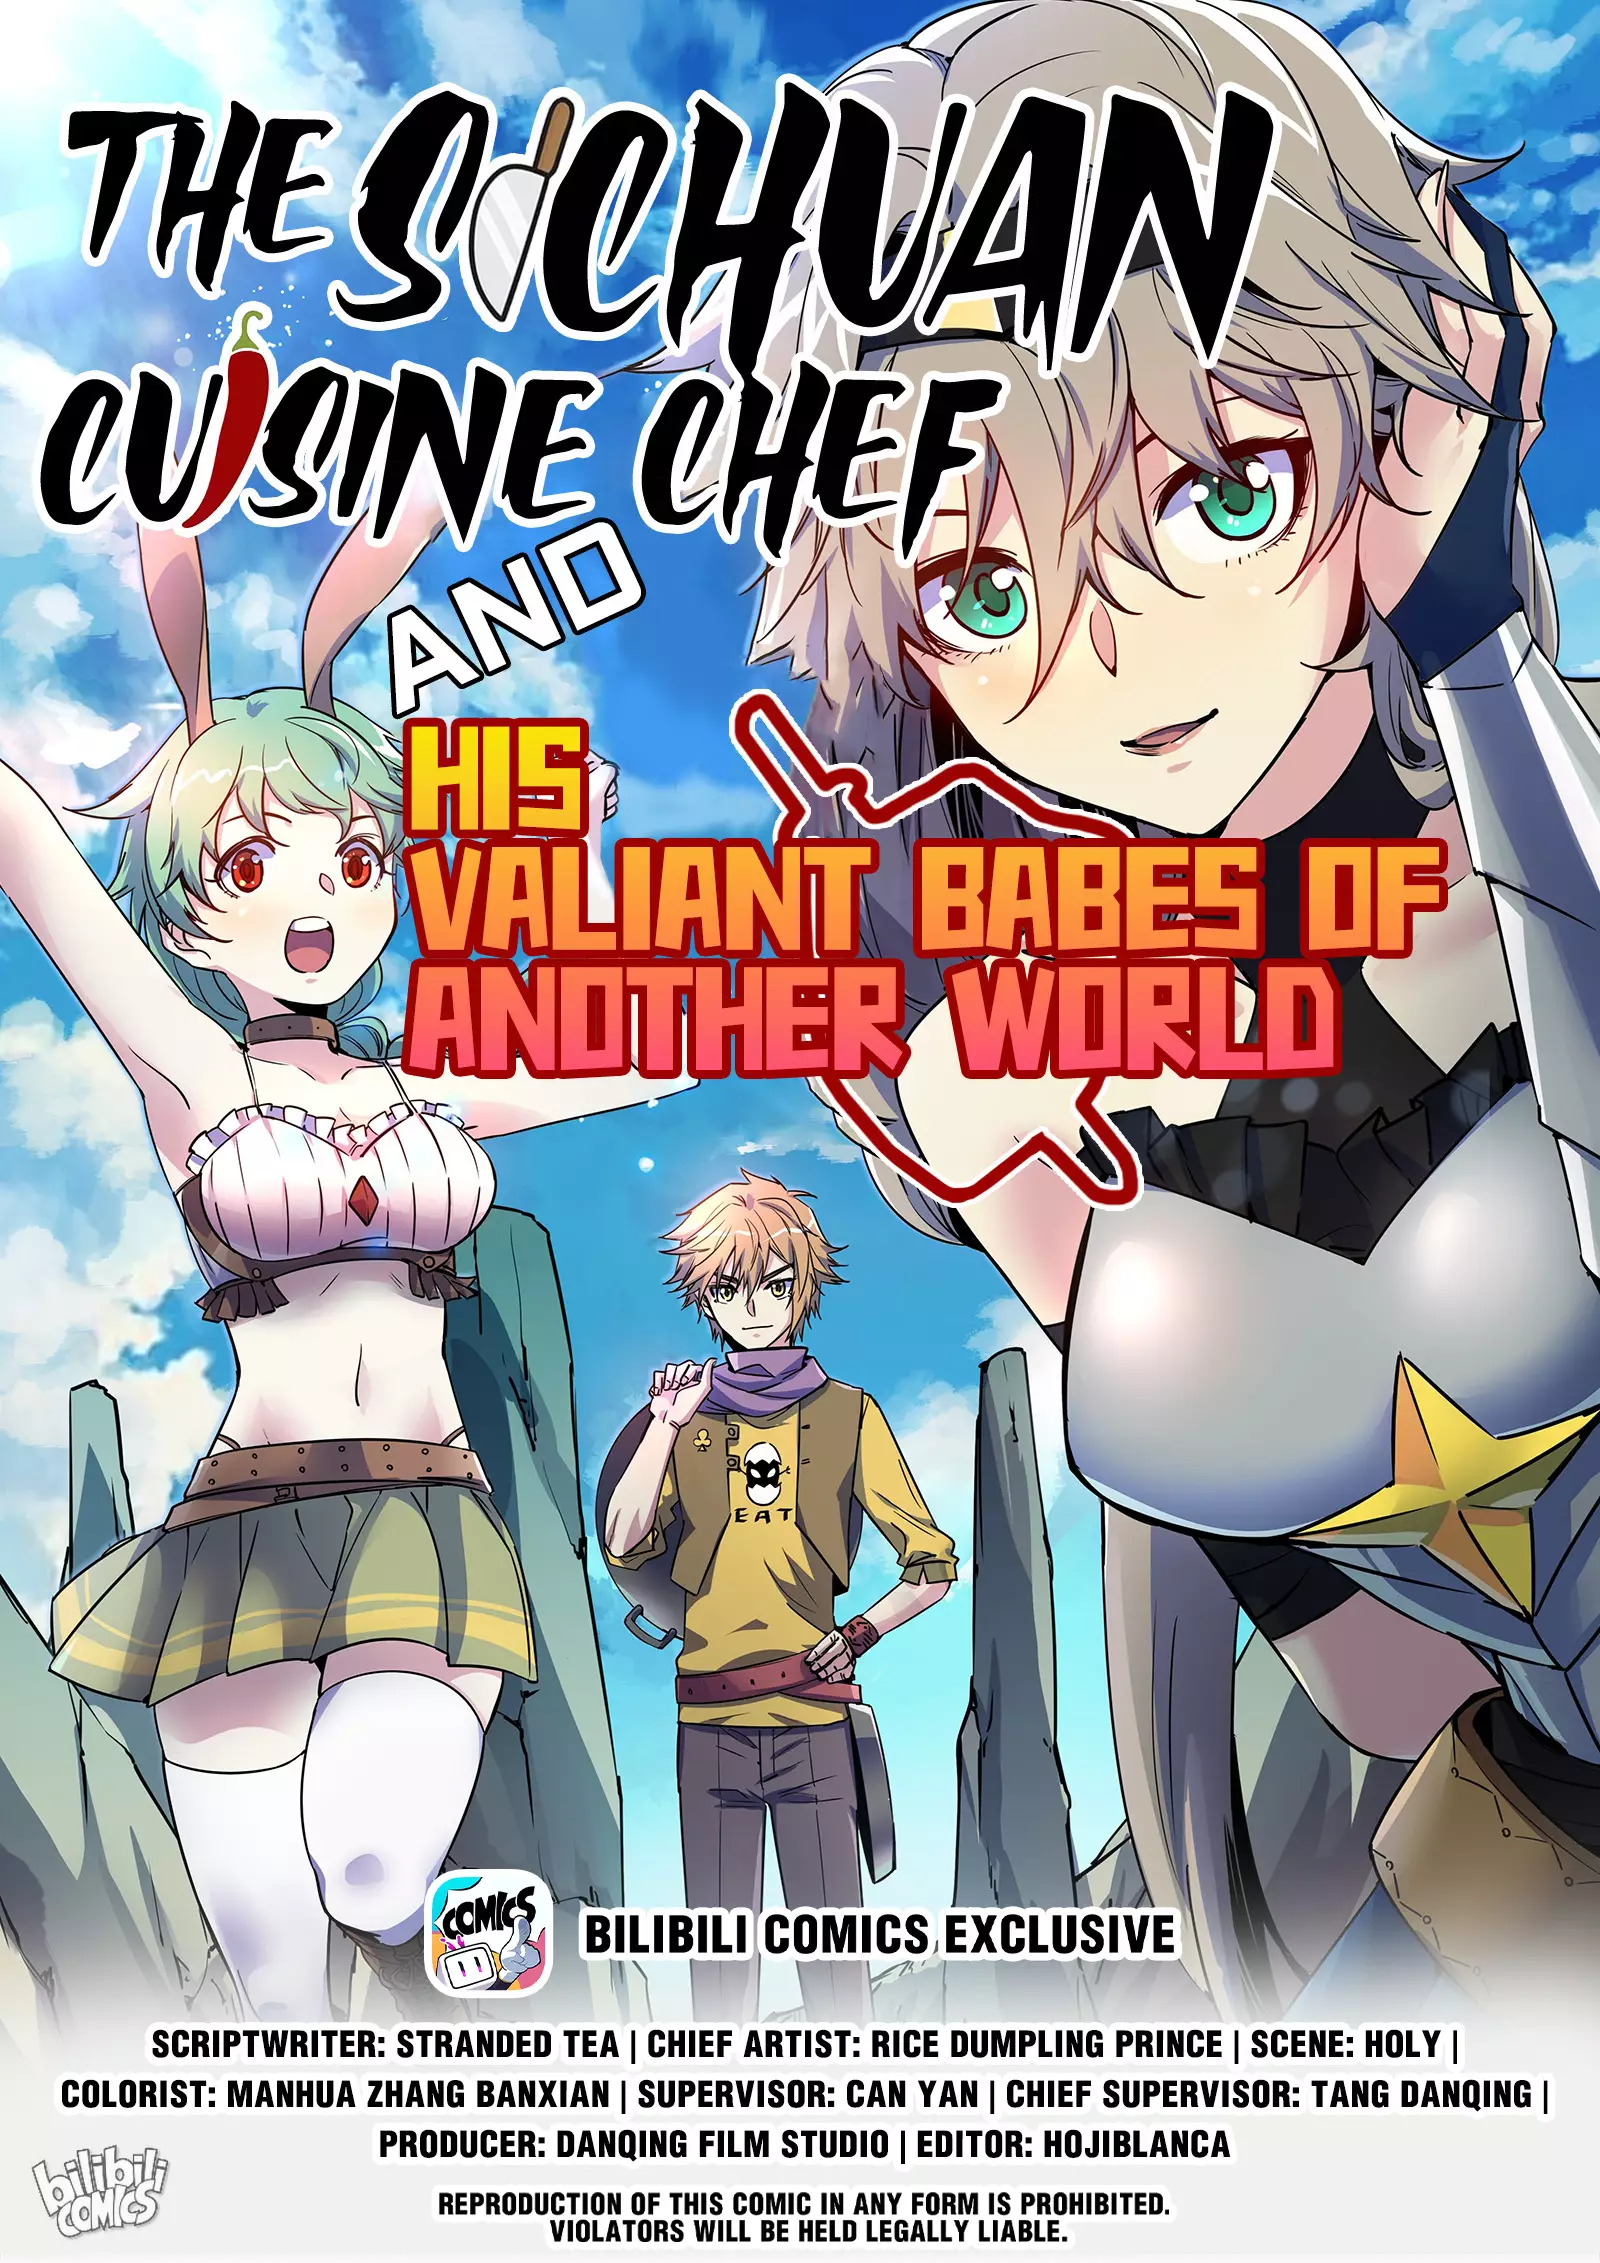 The Sichuan Cuisine Chef And His Valiant Babes Of Another World - 17 page 1-625e9dab